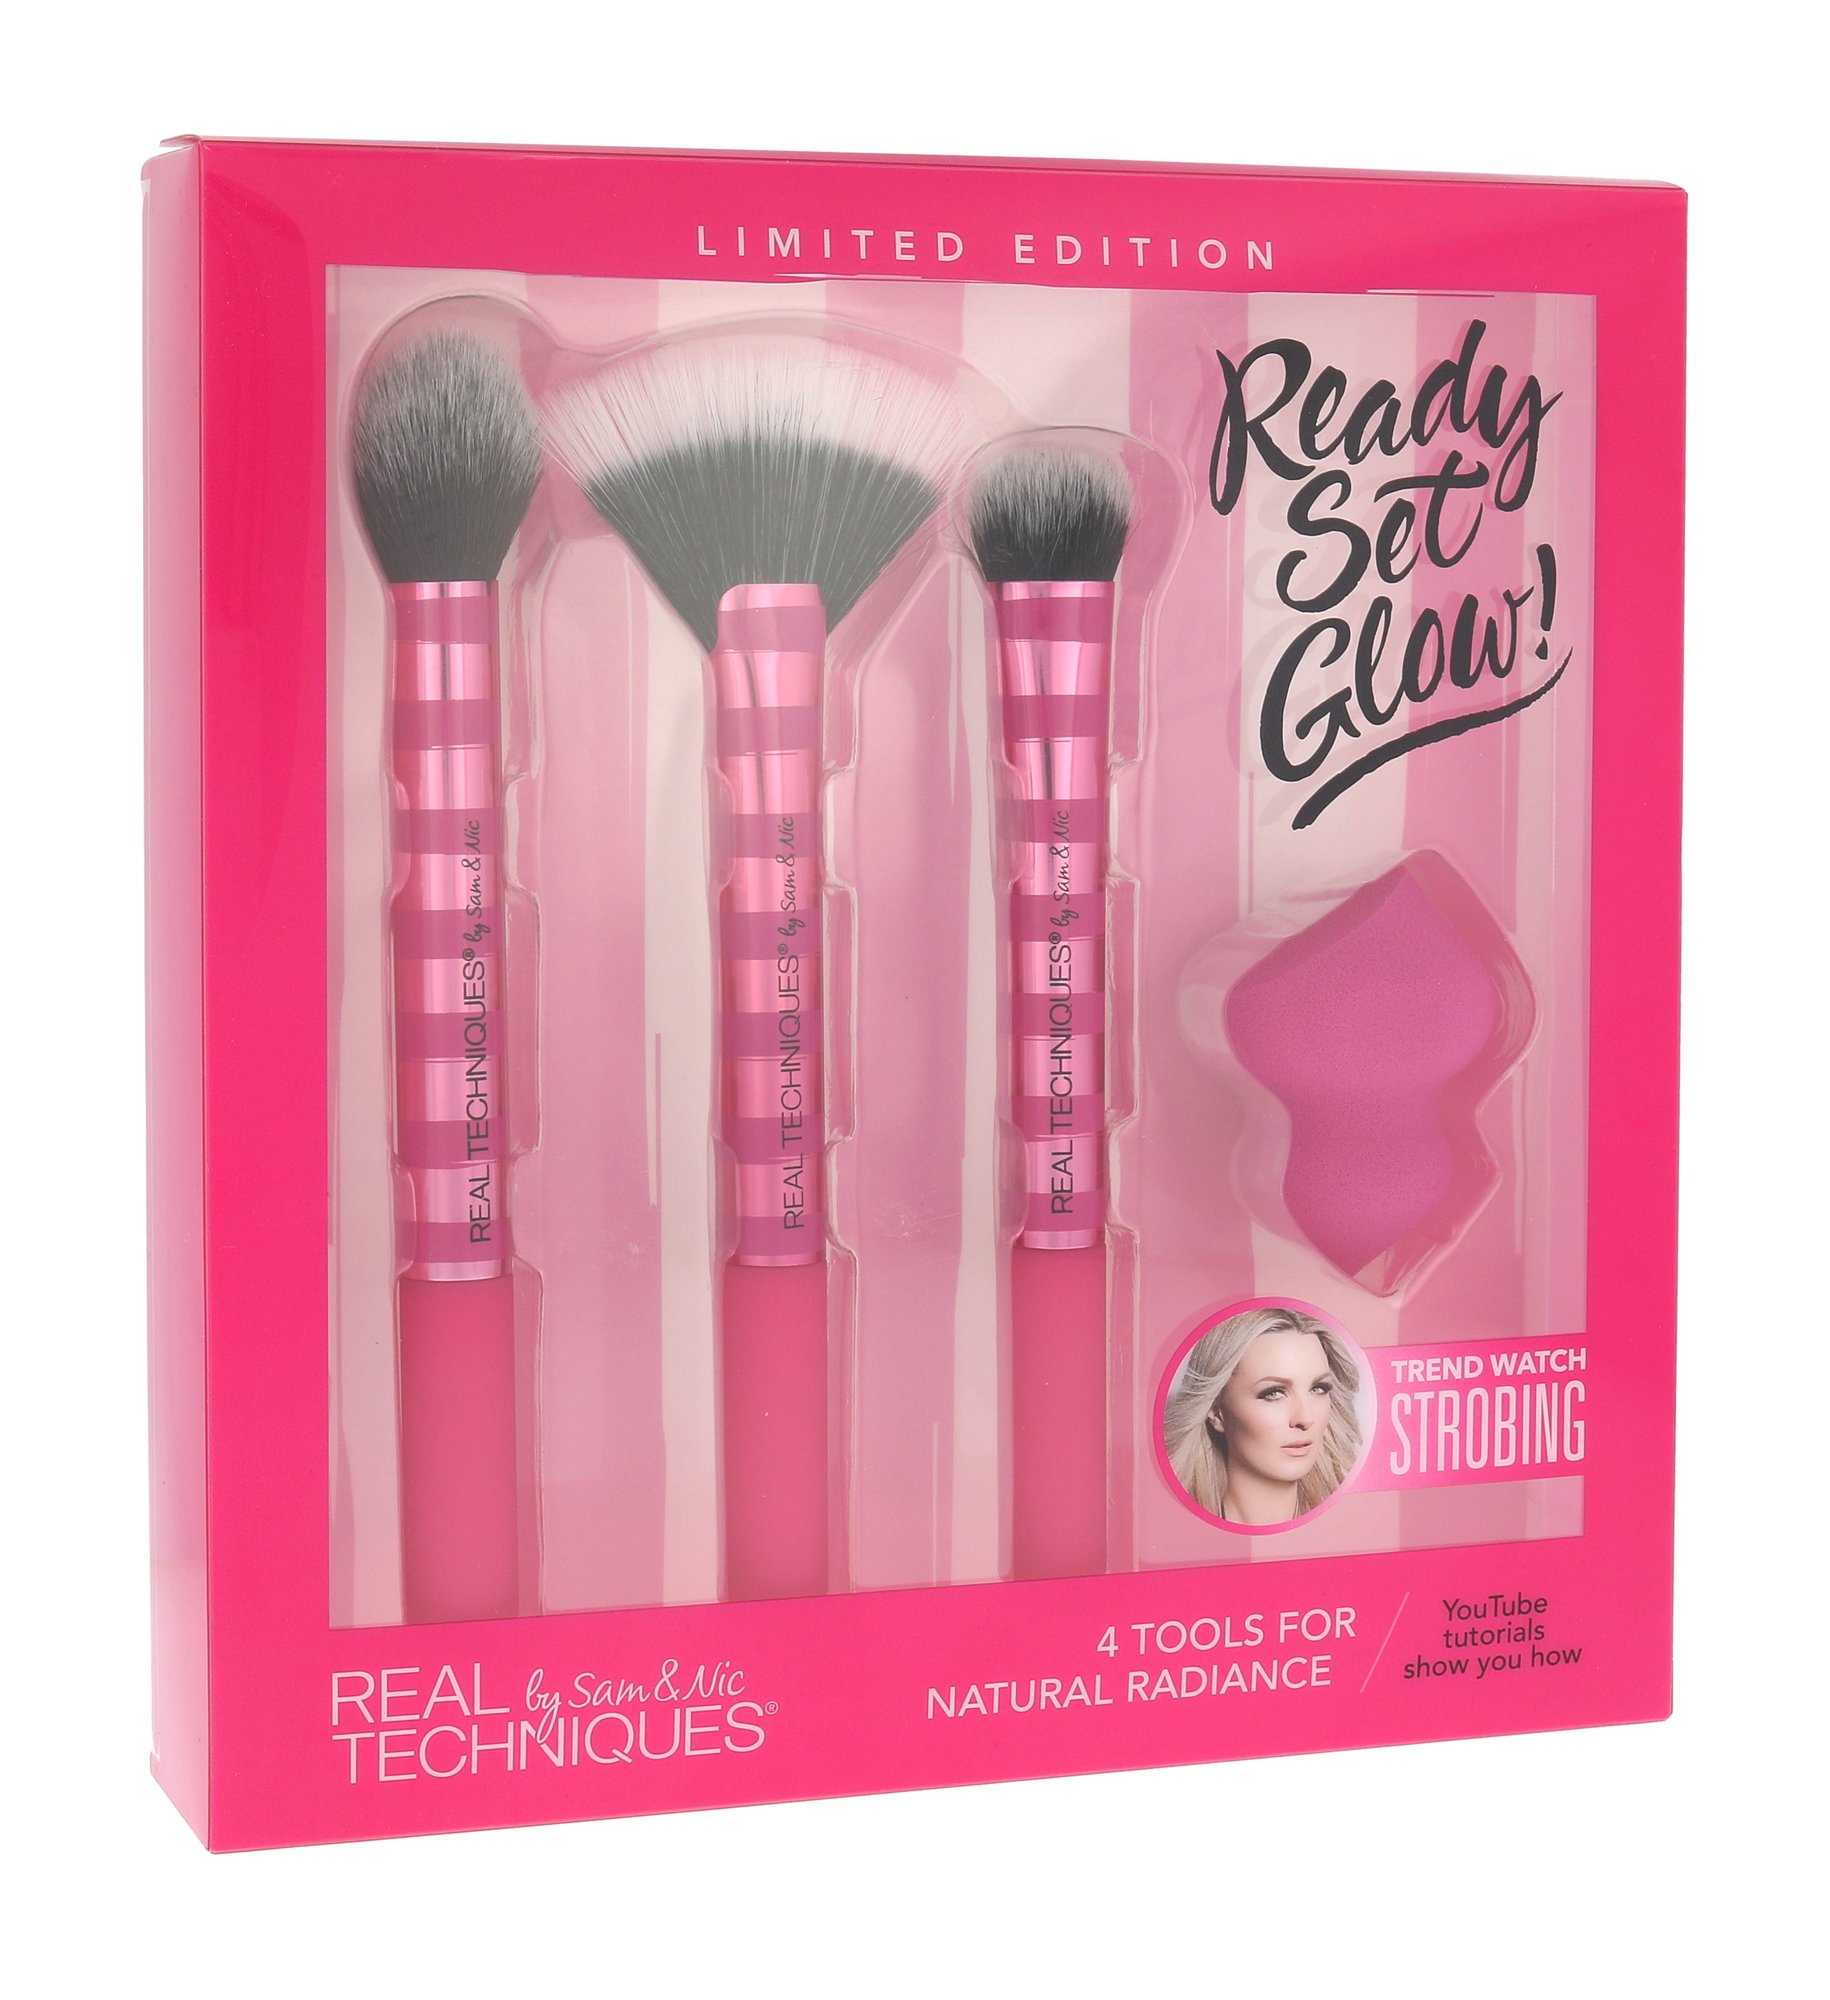 Real Techniques Brushes Ready Set Glow! teptukas